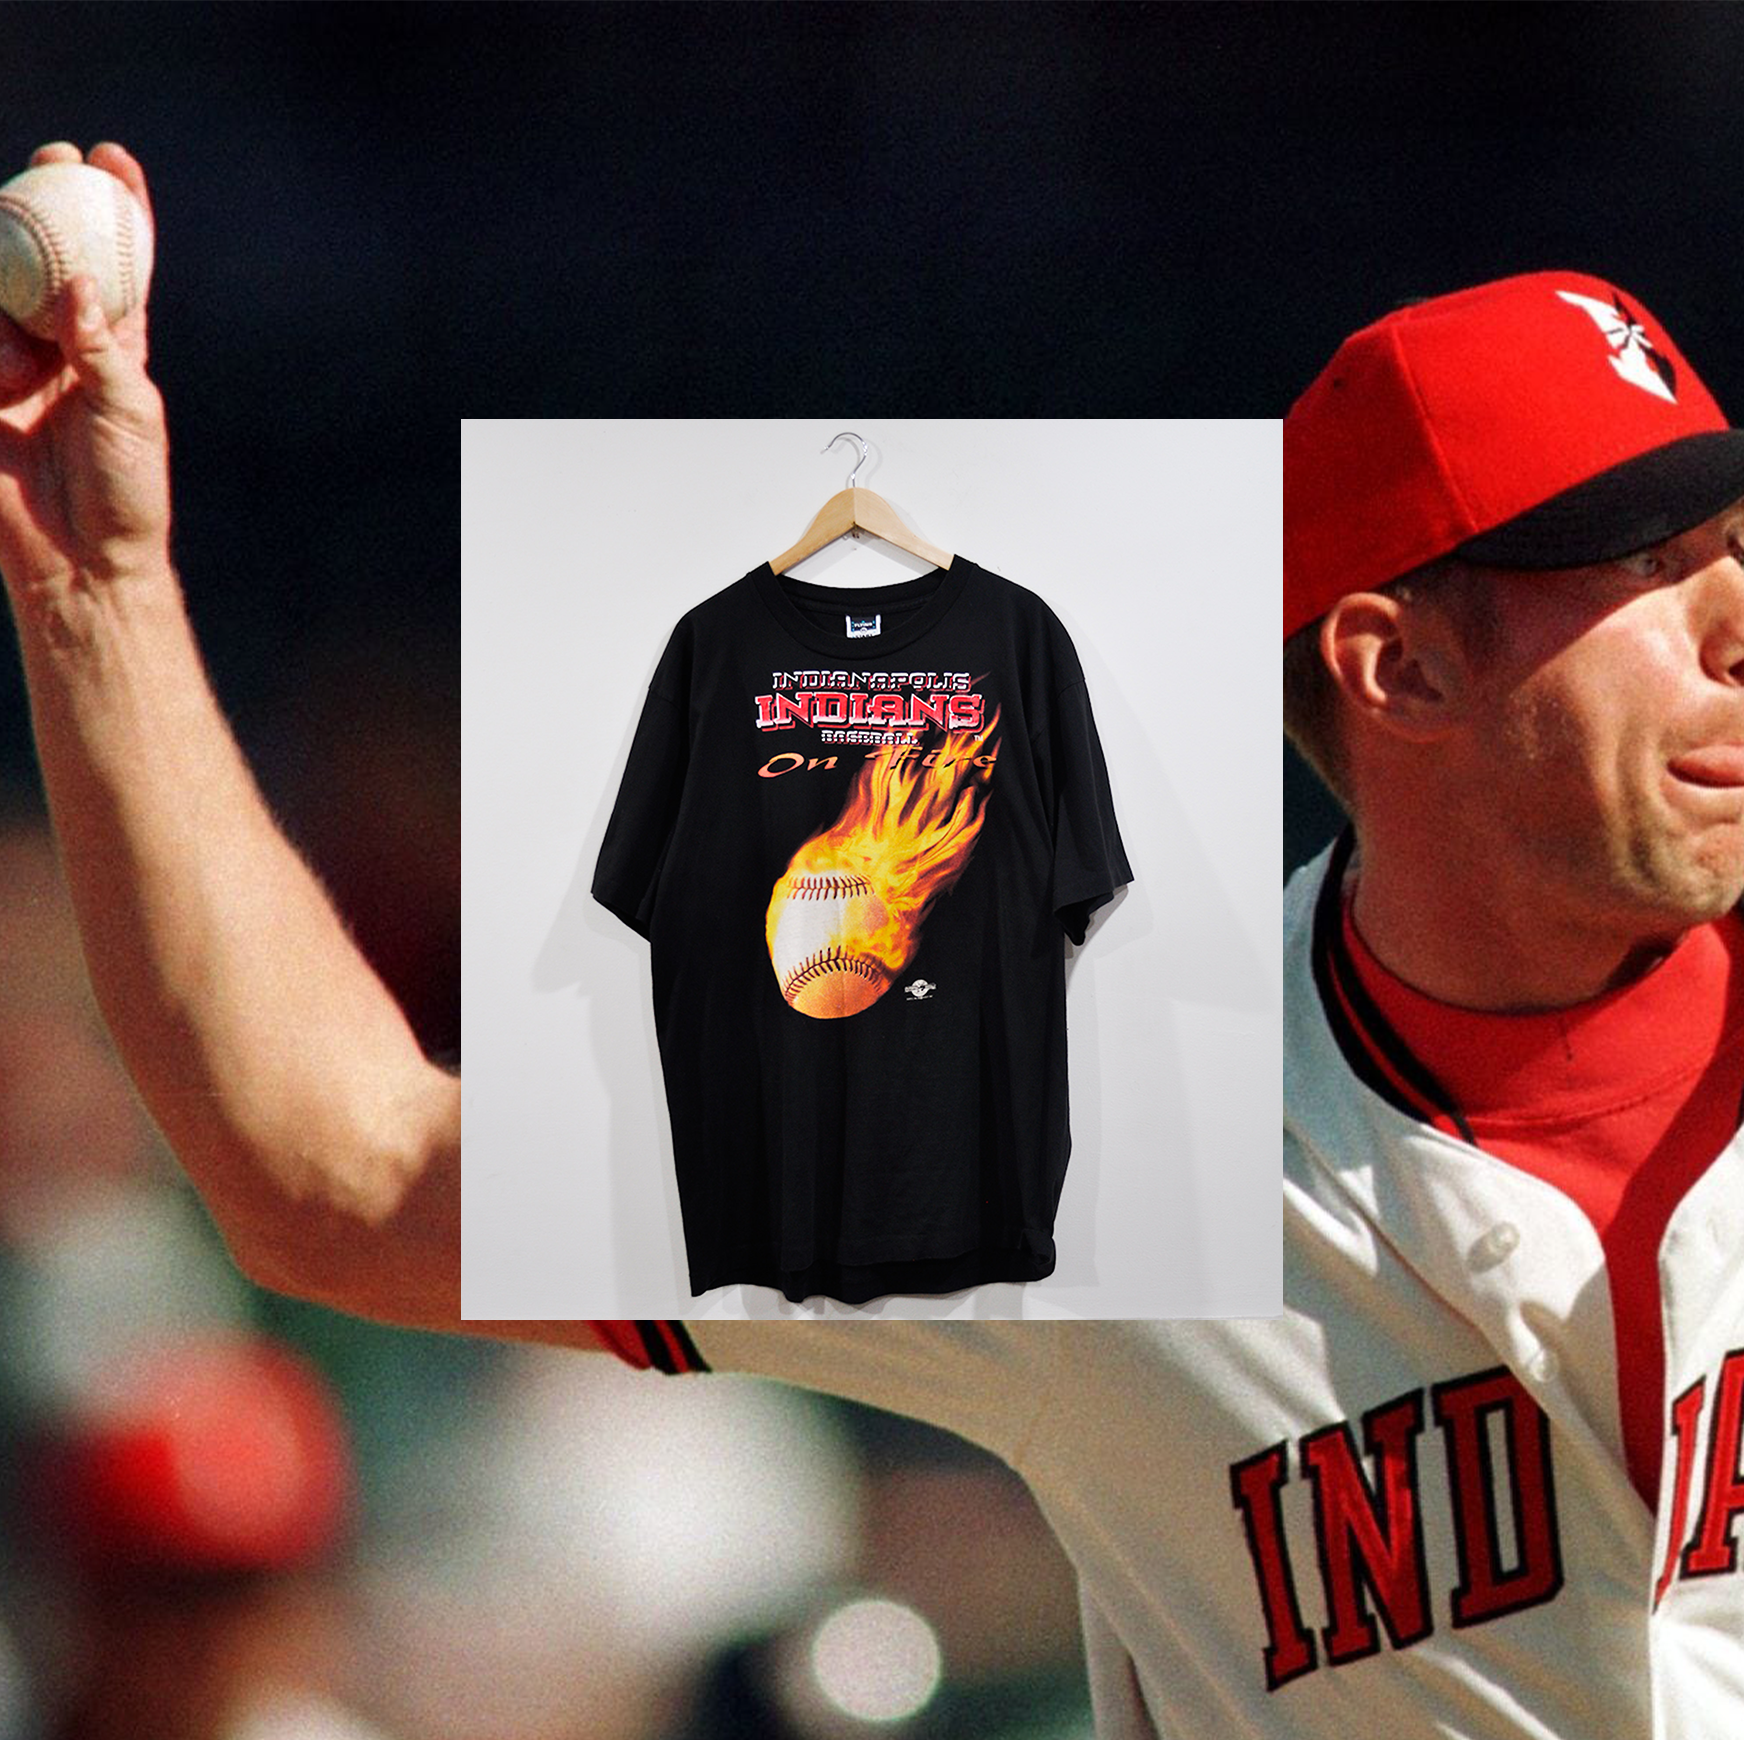 INDIANAPOLIS INDIANS "On Fire" TEE